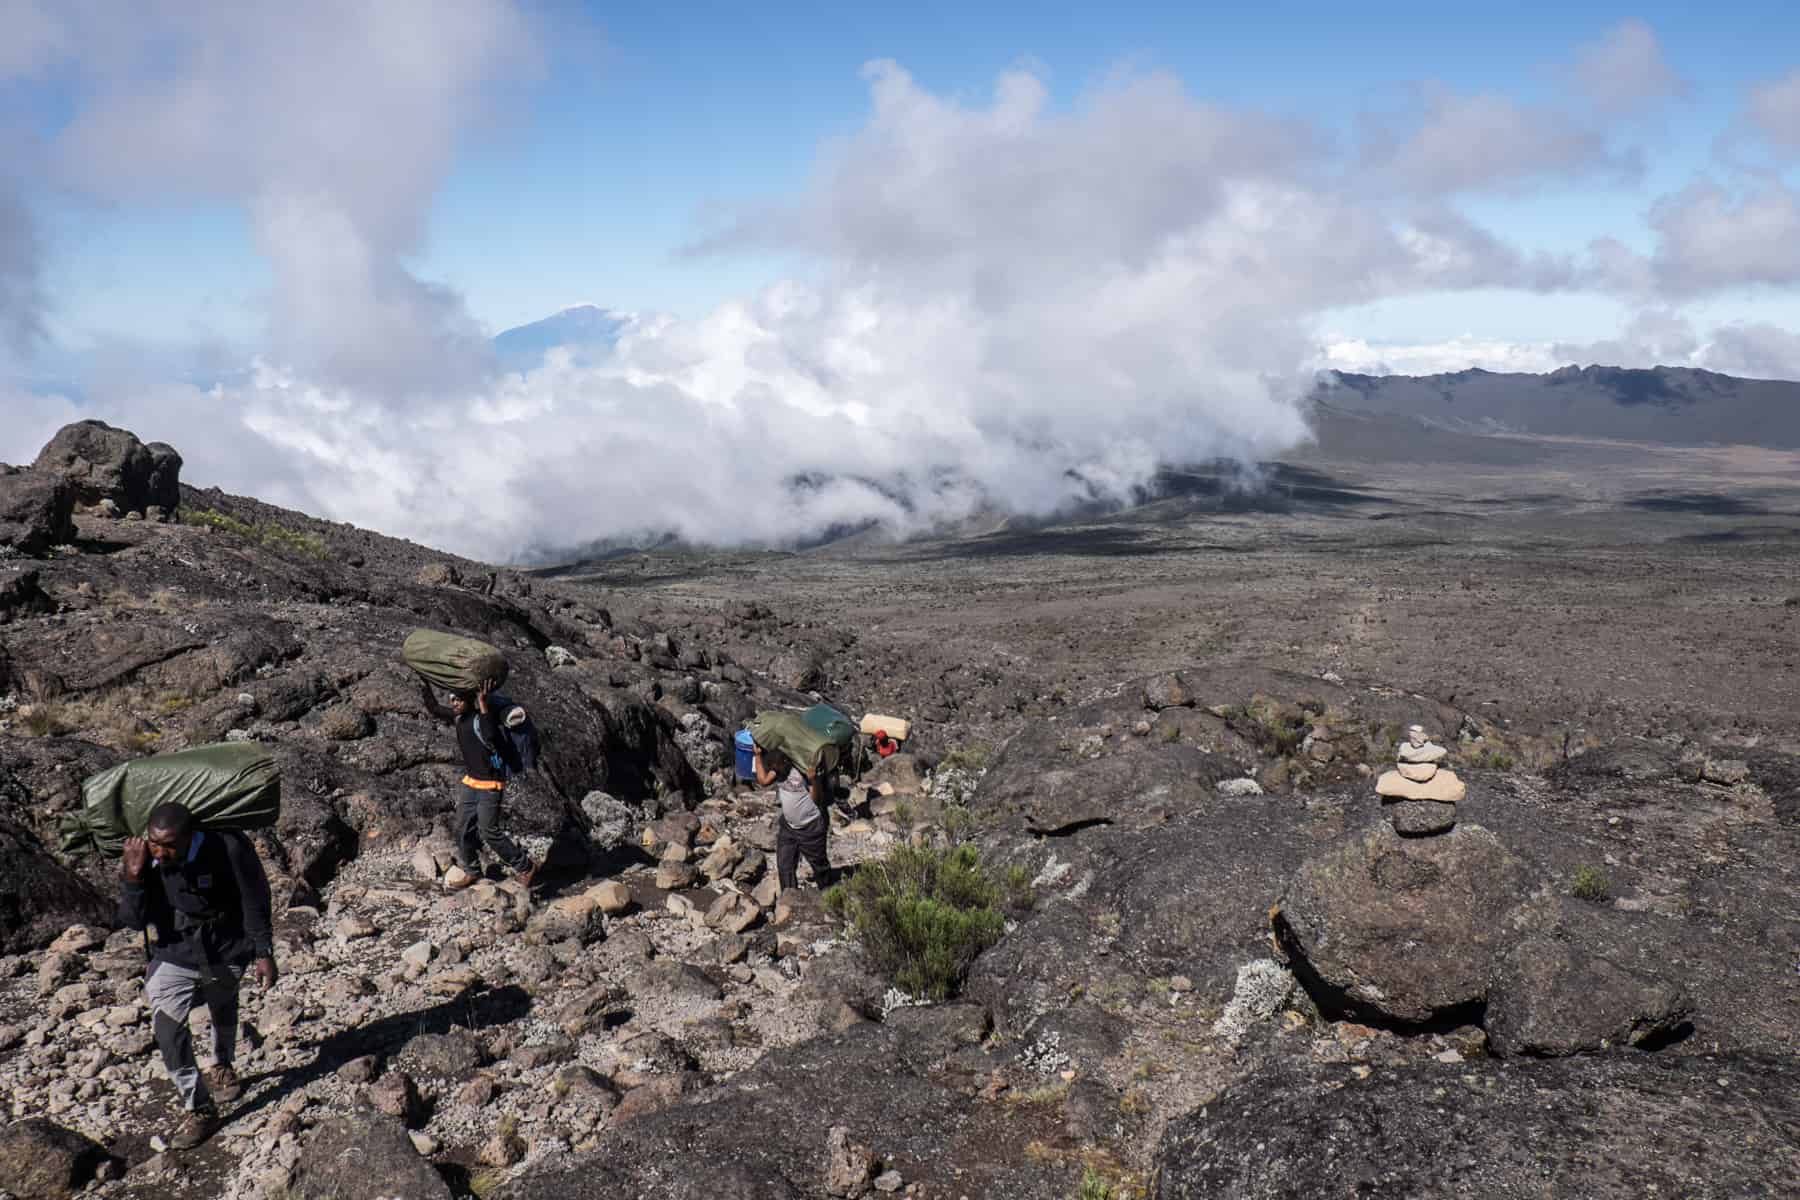 Porters carrying large green sacks walk over the rocky Shira Cathedral ridge with a view over the dry green area of the Kilimanjaro Shira 2 Camp.